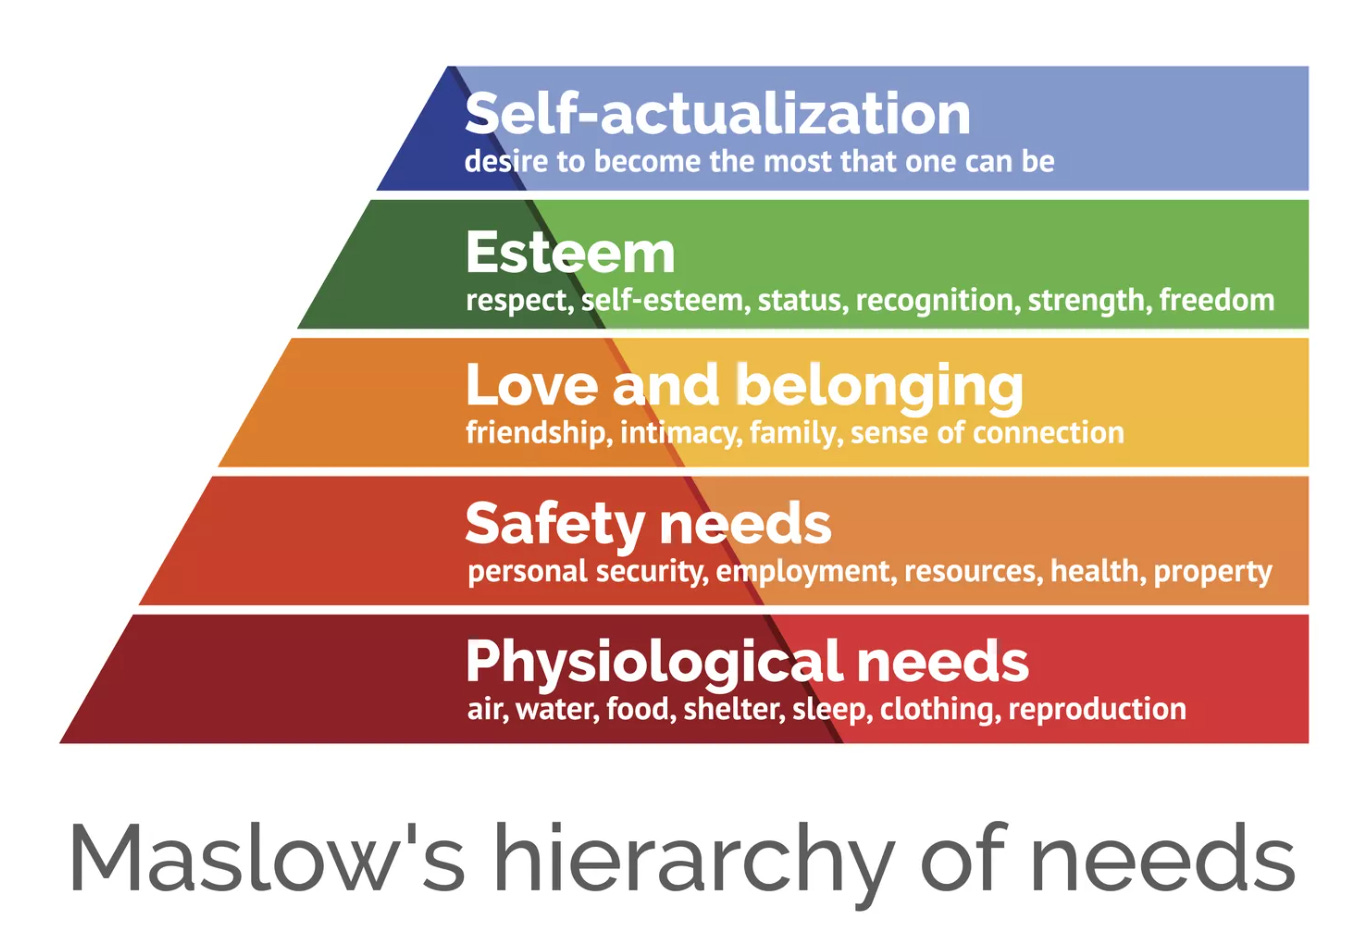 Maslow's Heirarchy of Needs, presented as a color-coded pyramid.